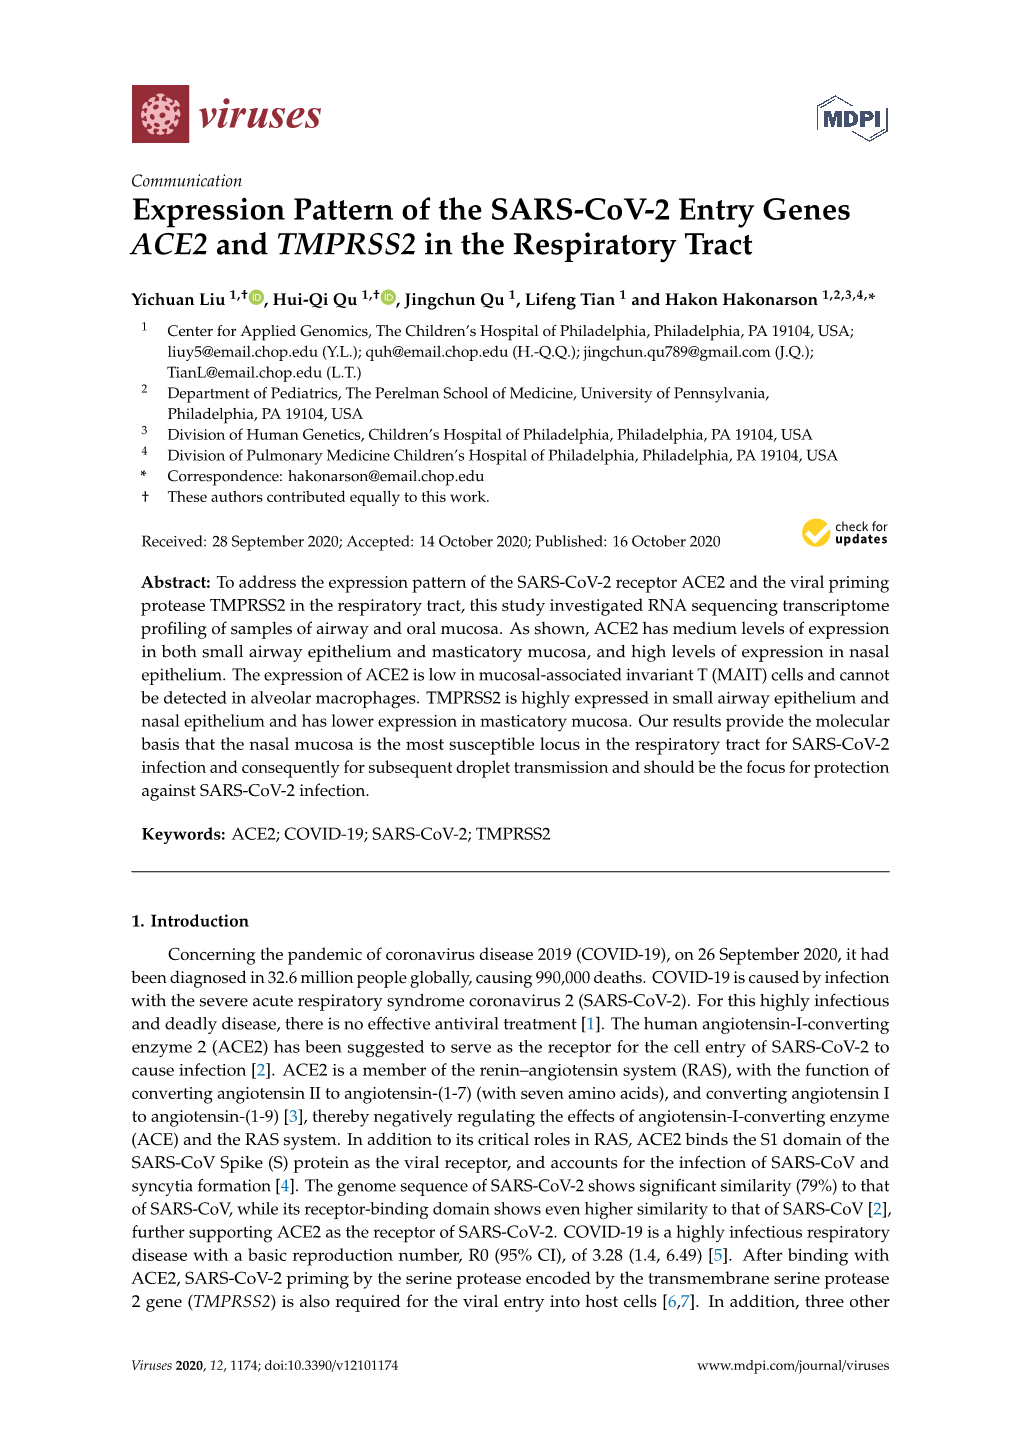 Expression Pattern of the SARS-Cov-2 Entry Genes ACE2 and TMPRSS2 in the Respiratory Tract